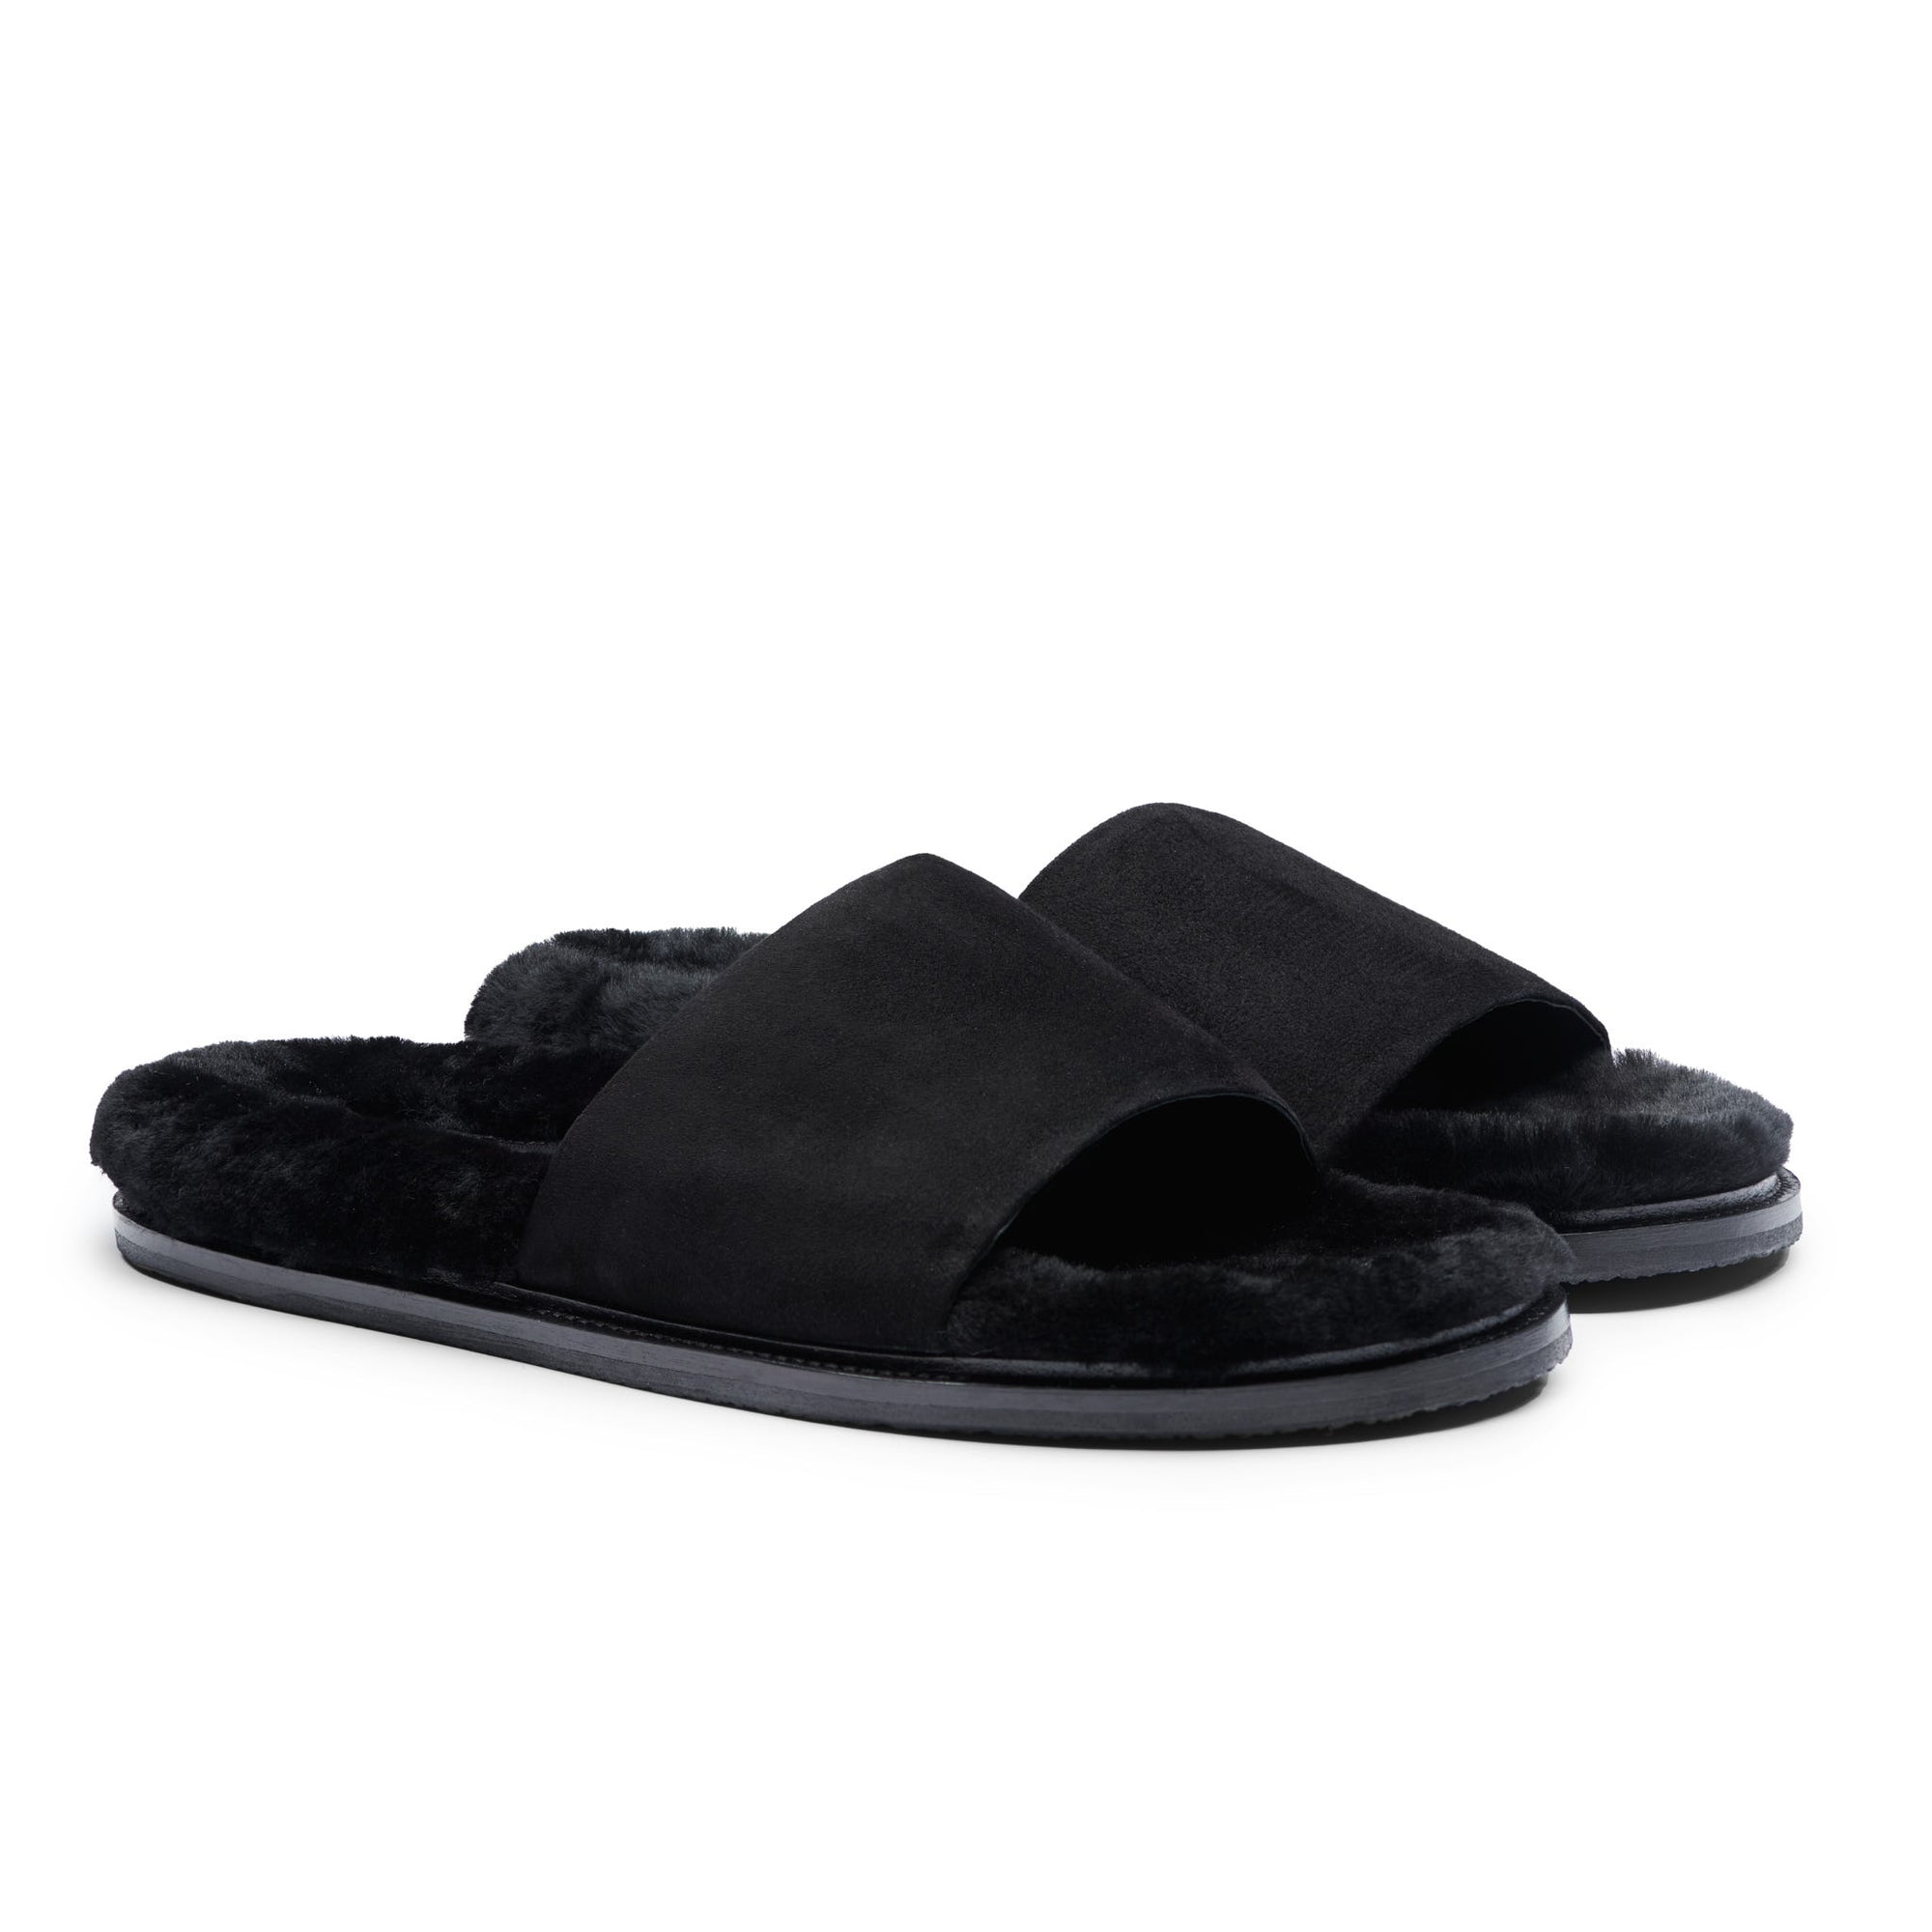 Inabo Men's Patio slipper in black suede and shearling with a rubber outer sole